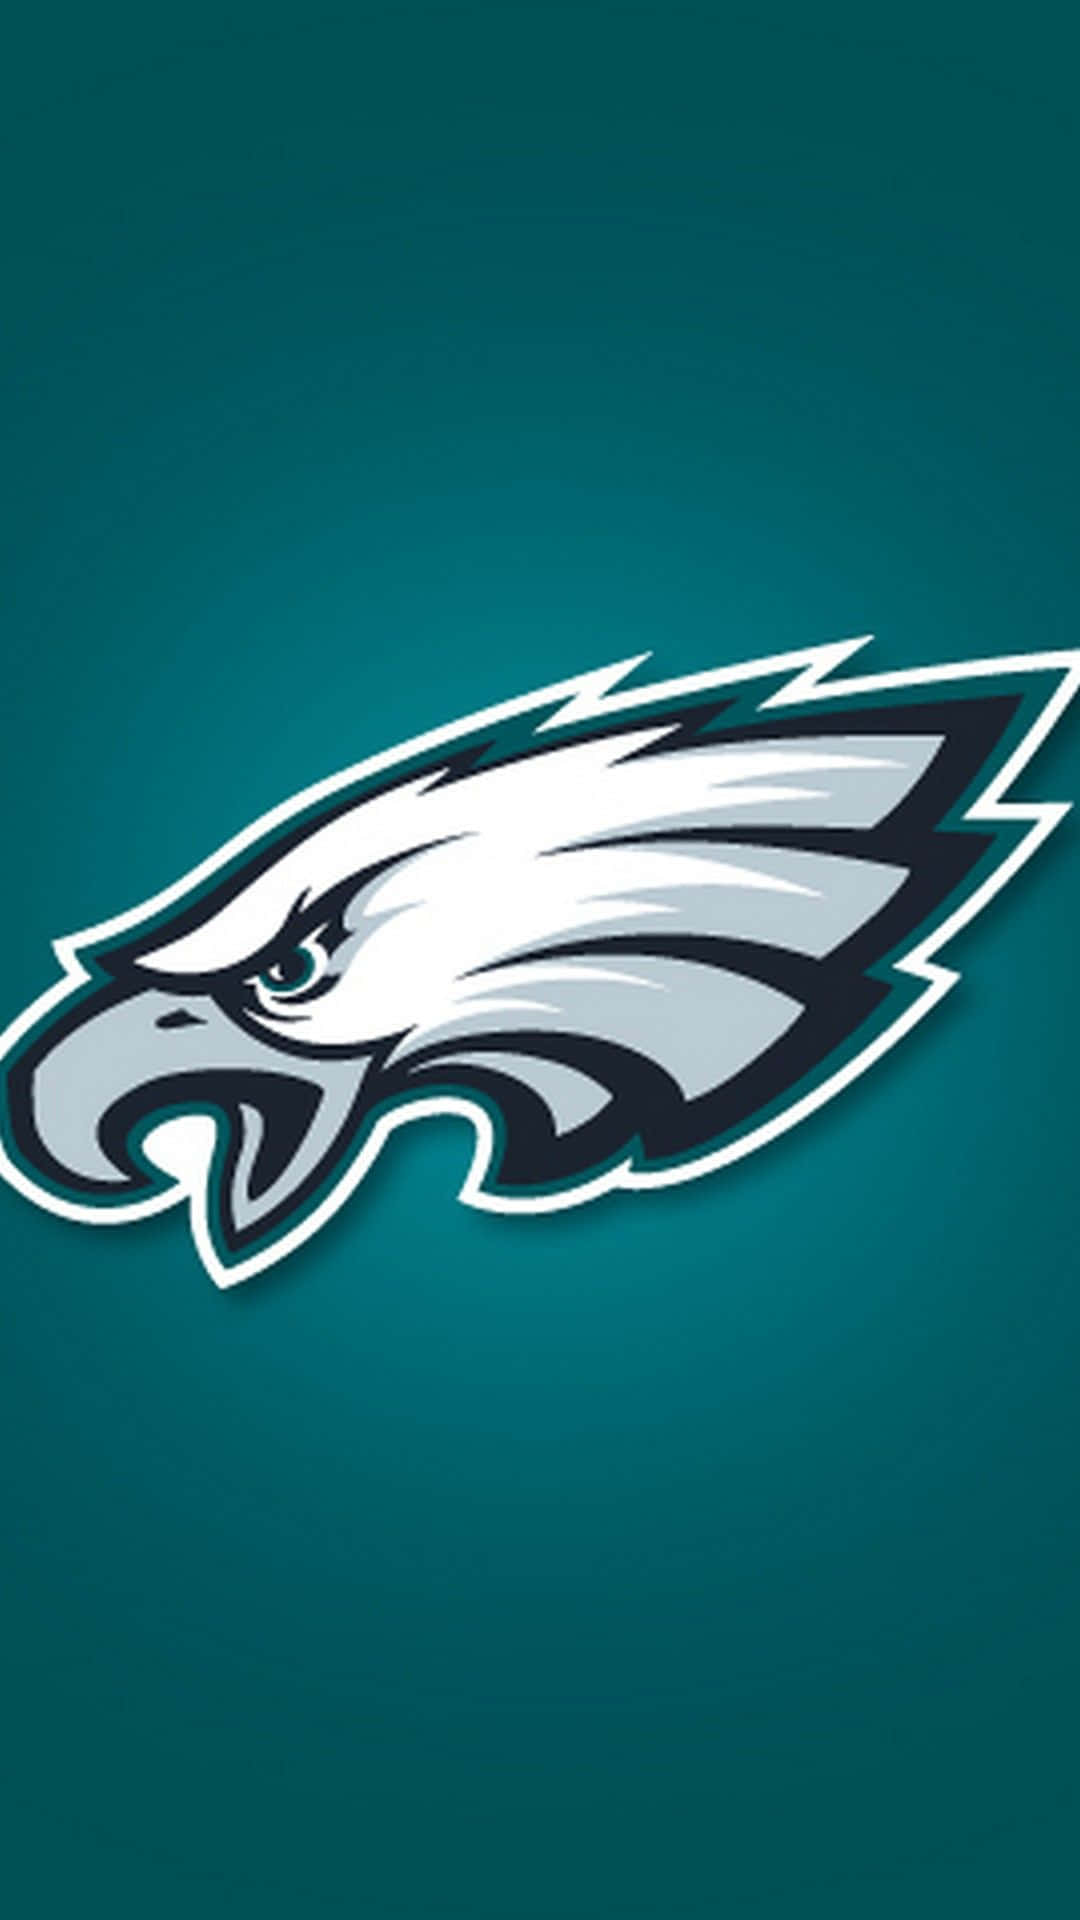 Be a part of the Philadelphia Eagles team with the official iPhone background! Wallpaper